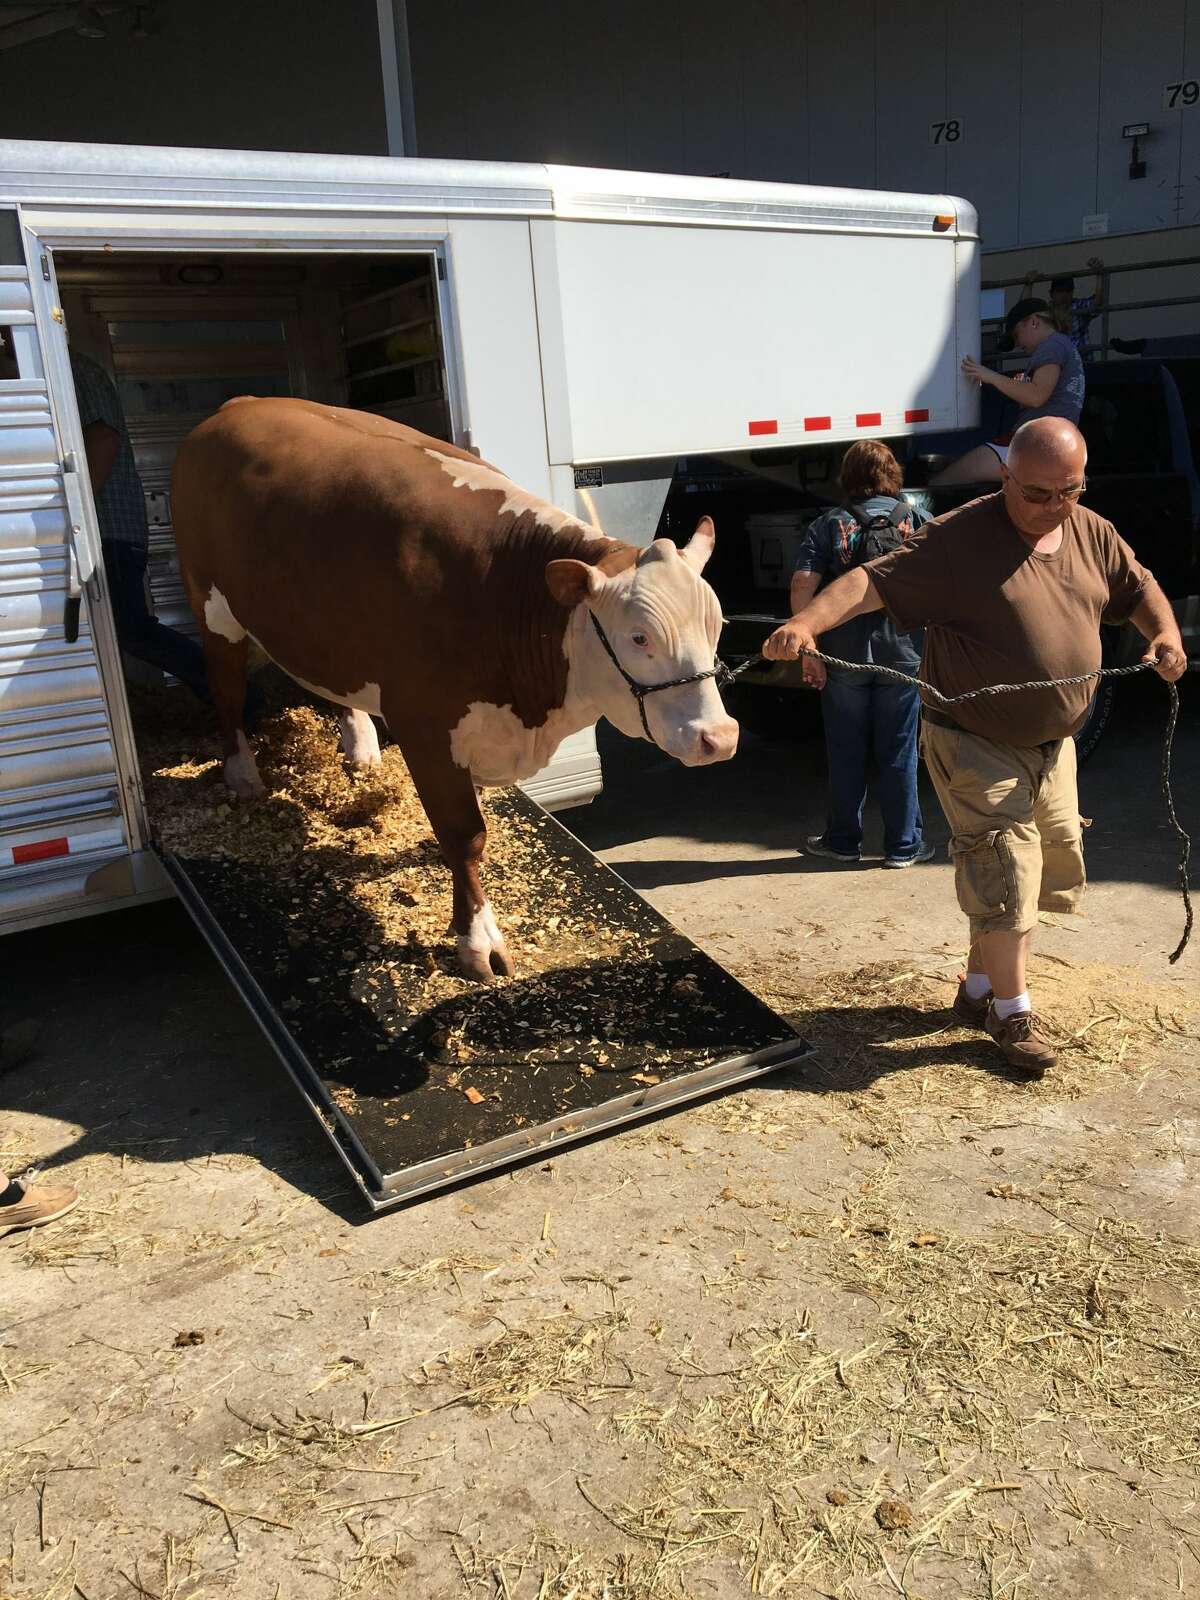 Ernie Kariainen, also with Scurry County 4-H, leads a steer out of a trailer. Keep going for a look back at the scene from the Houston Rodeo so far. 